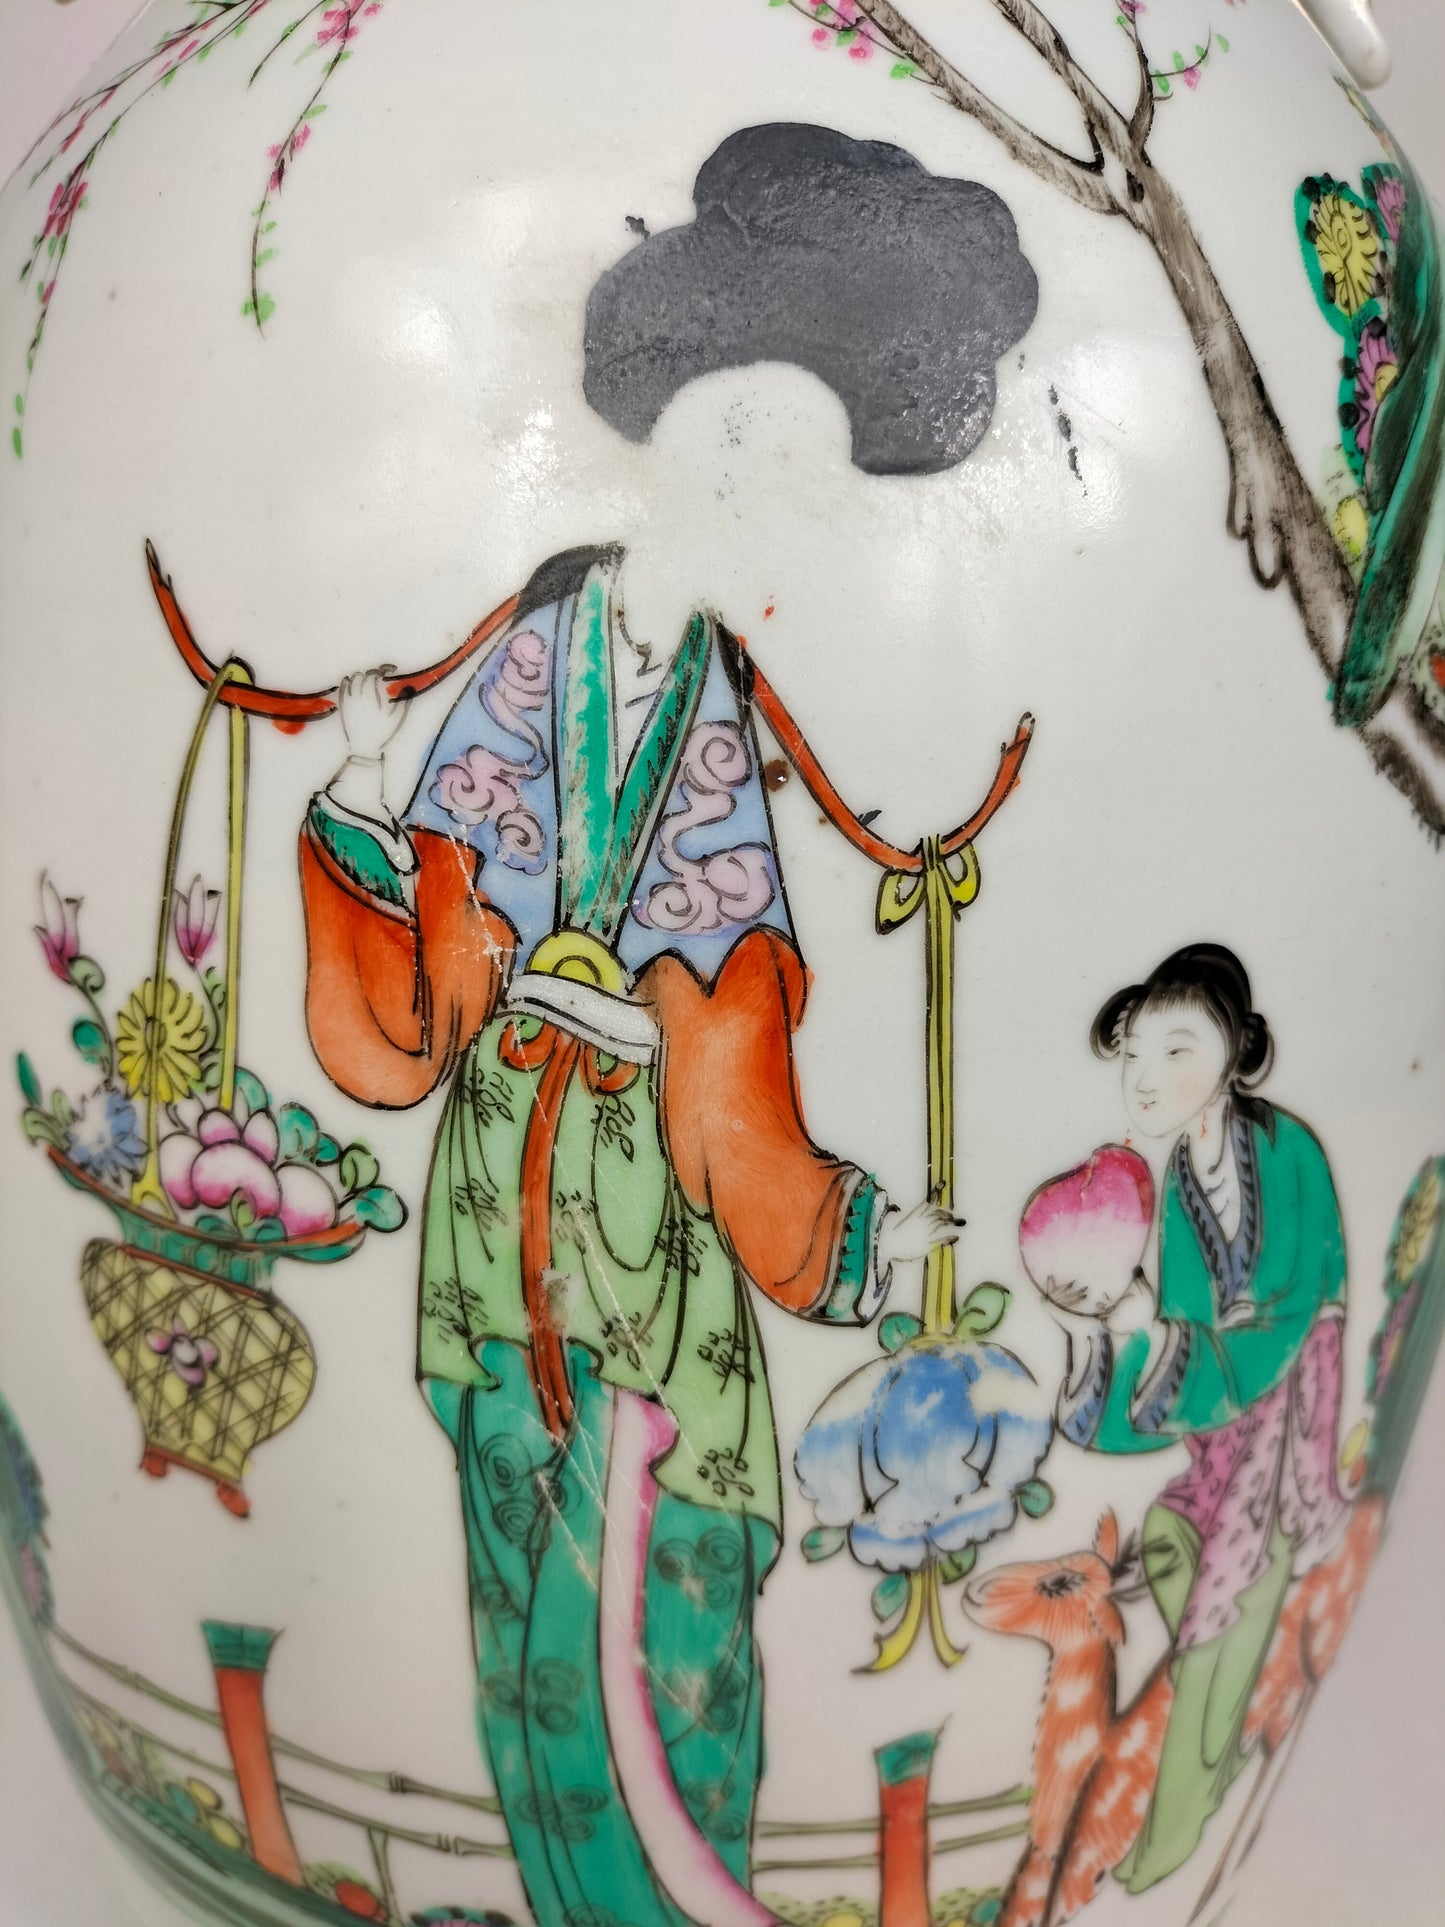 Antique Chinese vase decorated with a lady and deer// Republic Period (1912-1949)